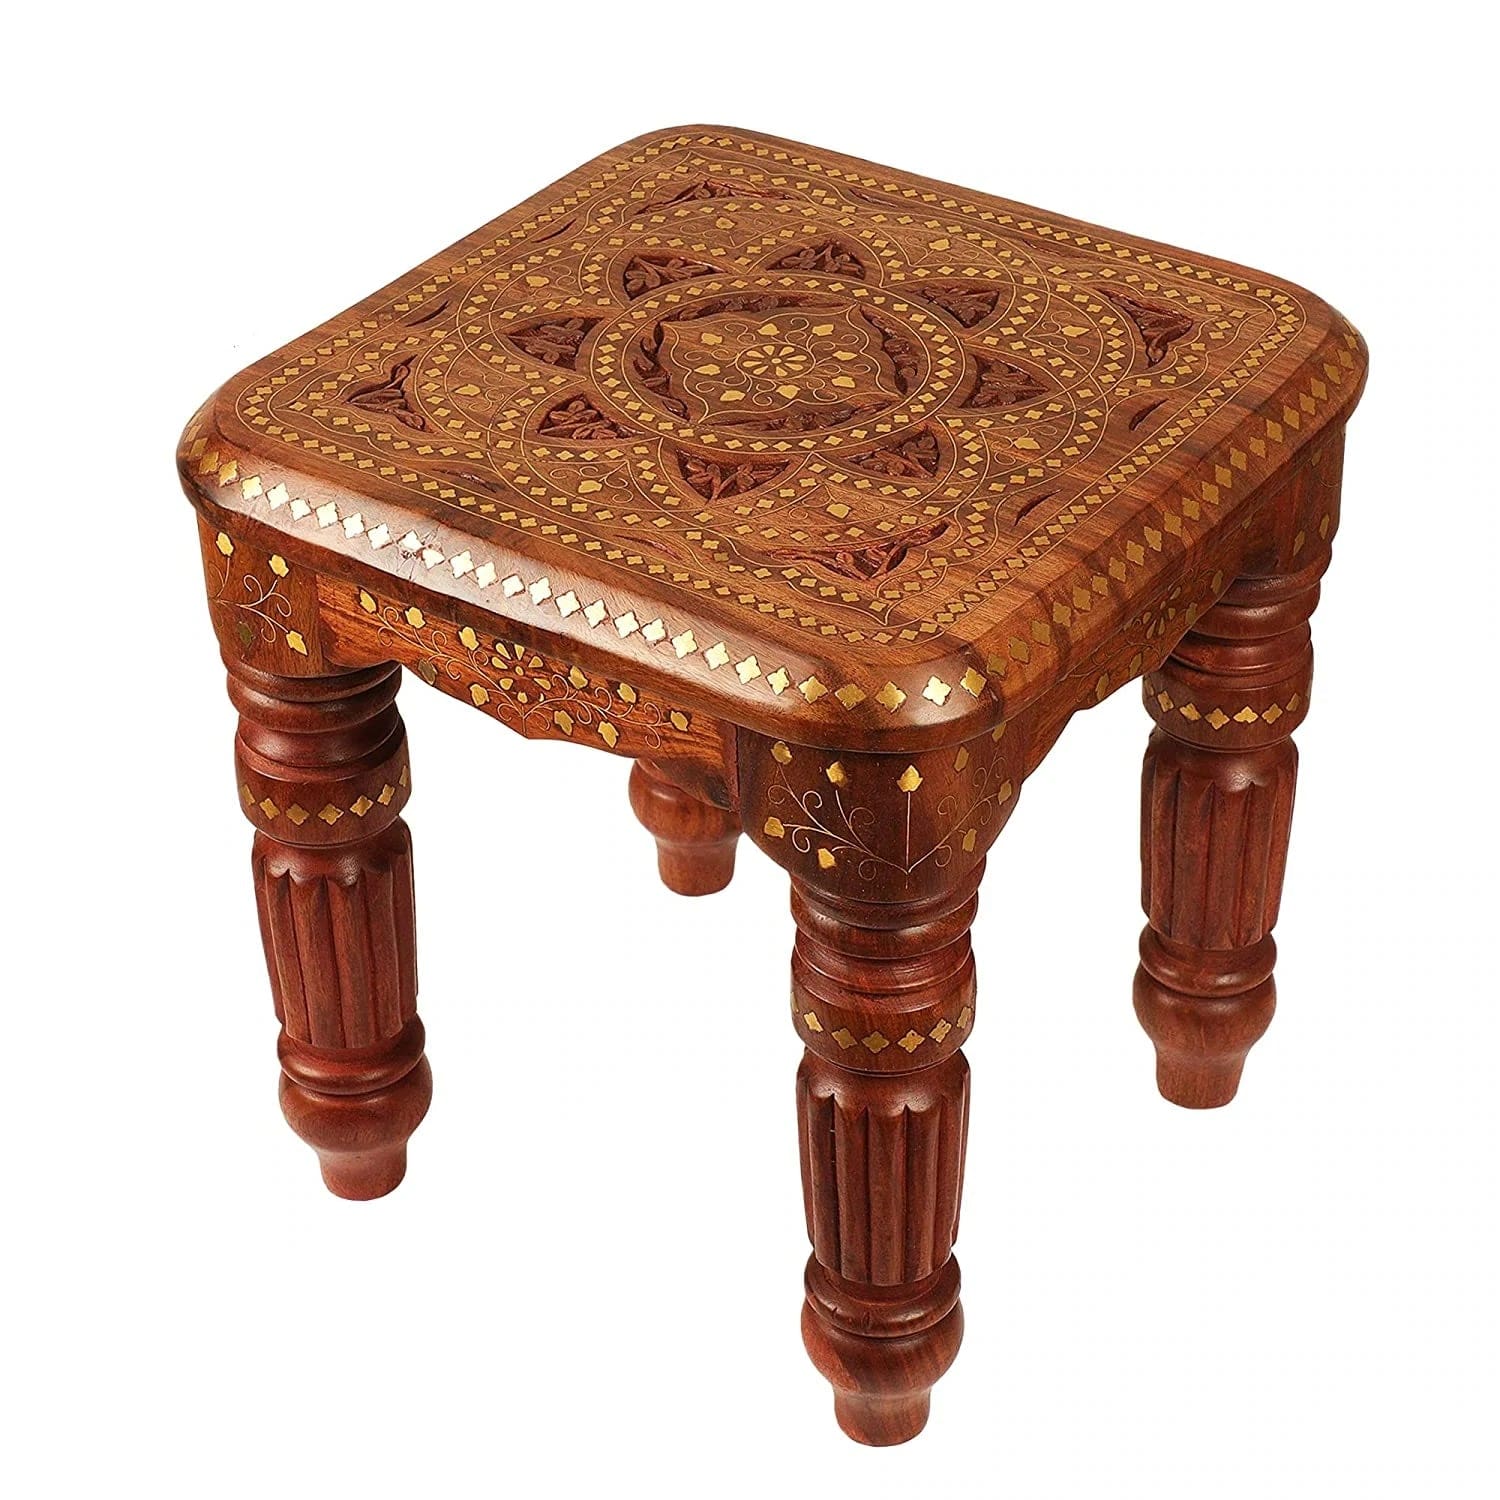 SHEESHAM WOOD BRASS CARVING STOLL II WOODEN CARVING STOOL II ANTIQUE DESIGN STOOL